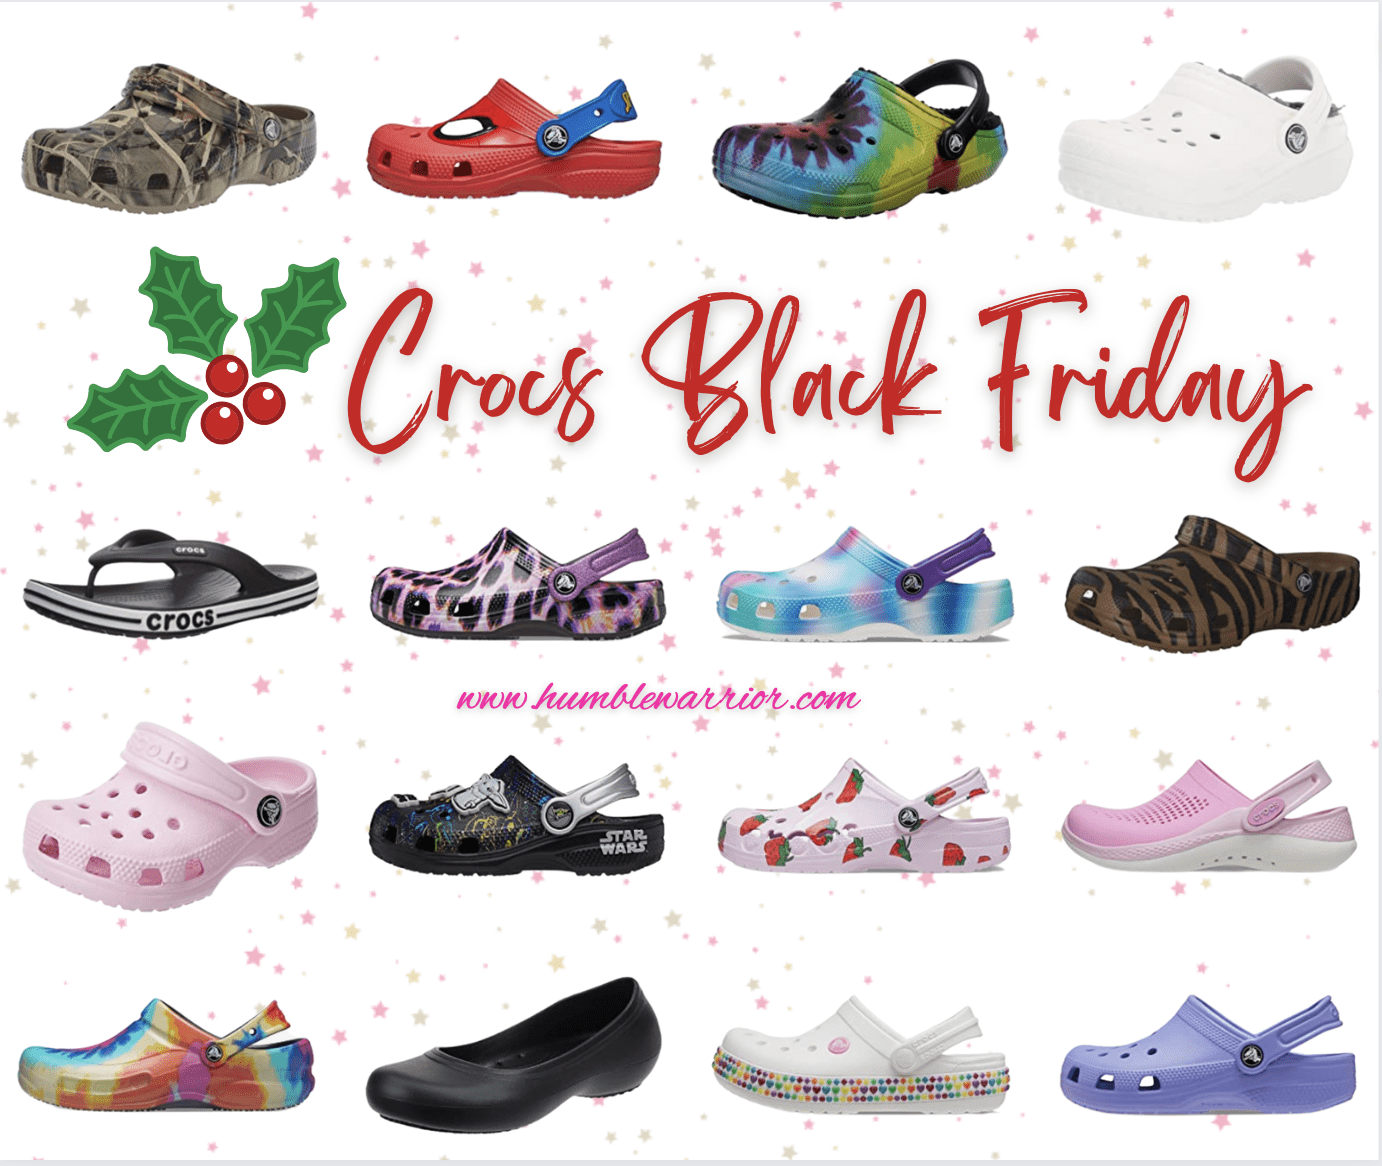 Black Friday Croc Savings! Home of The Humble Warrior